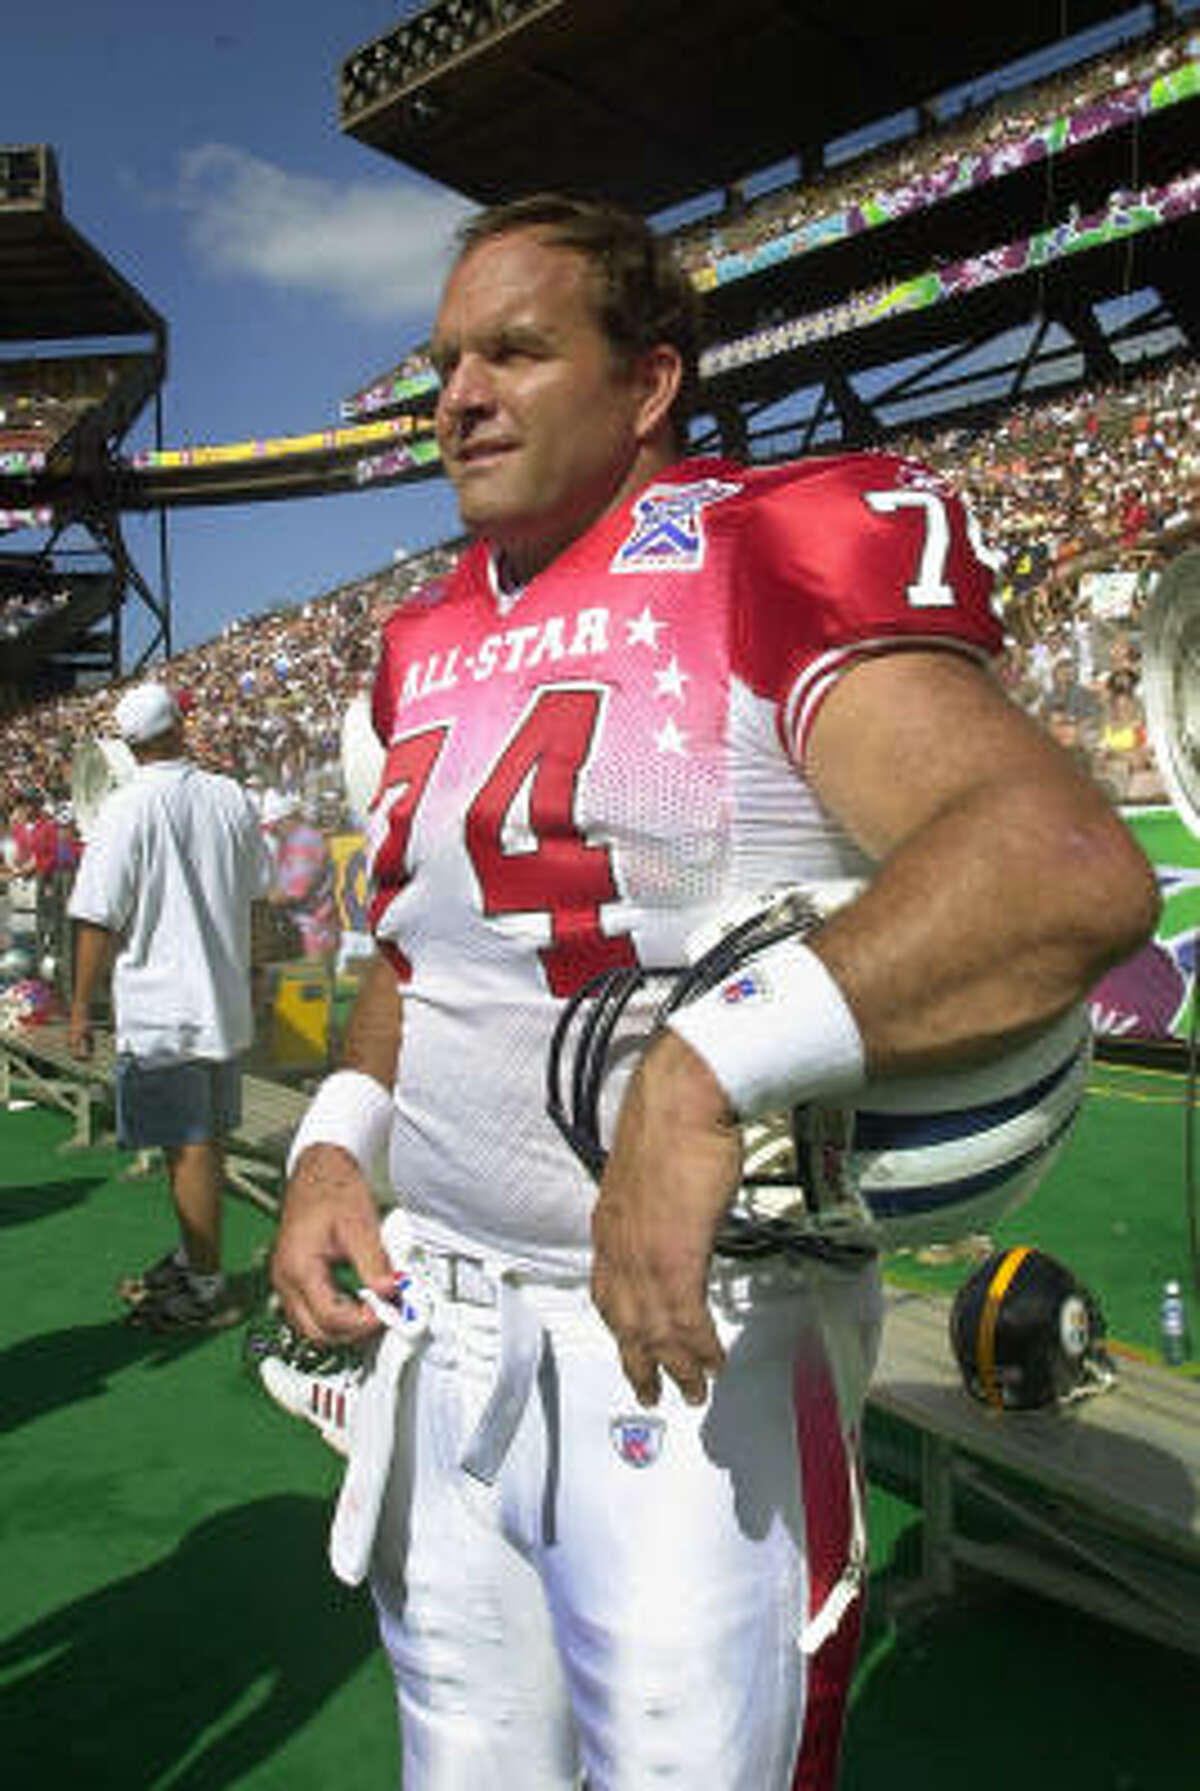 Veteran Tennessee Titan center Bruce Matthews surveys the action in the closing minutes of the Pro Bowl game on Feb. 9, 2002, in Honolulu. At 40, he was the oldest player on either squad playing in the game at Aloha Stadium. He also has the most Pro Bowl experience; Matthews' 14 consecutive selections tied him with Hall of Famer Merlin Olsen for the most ever.